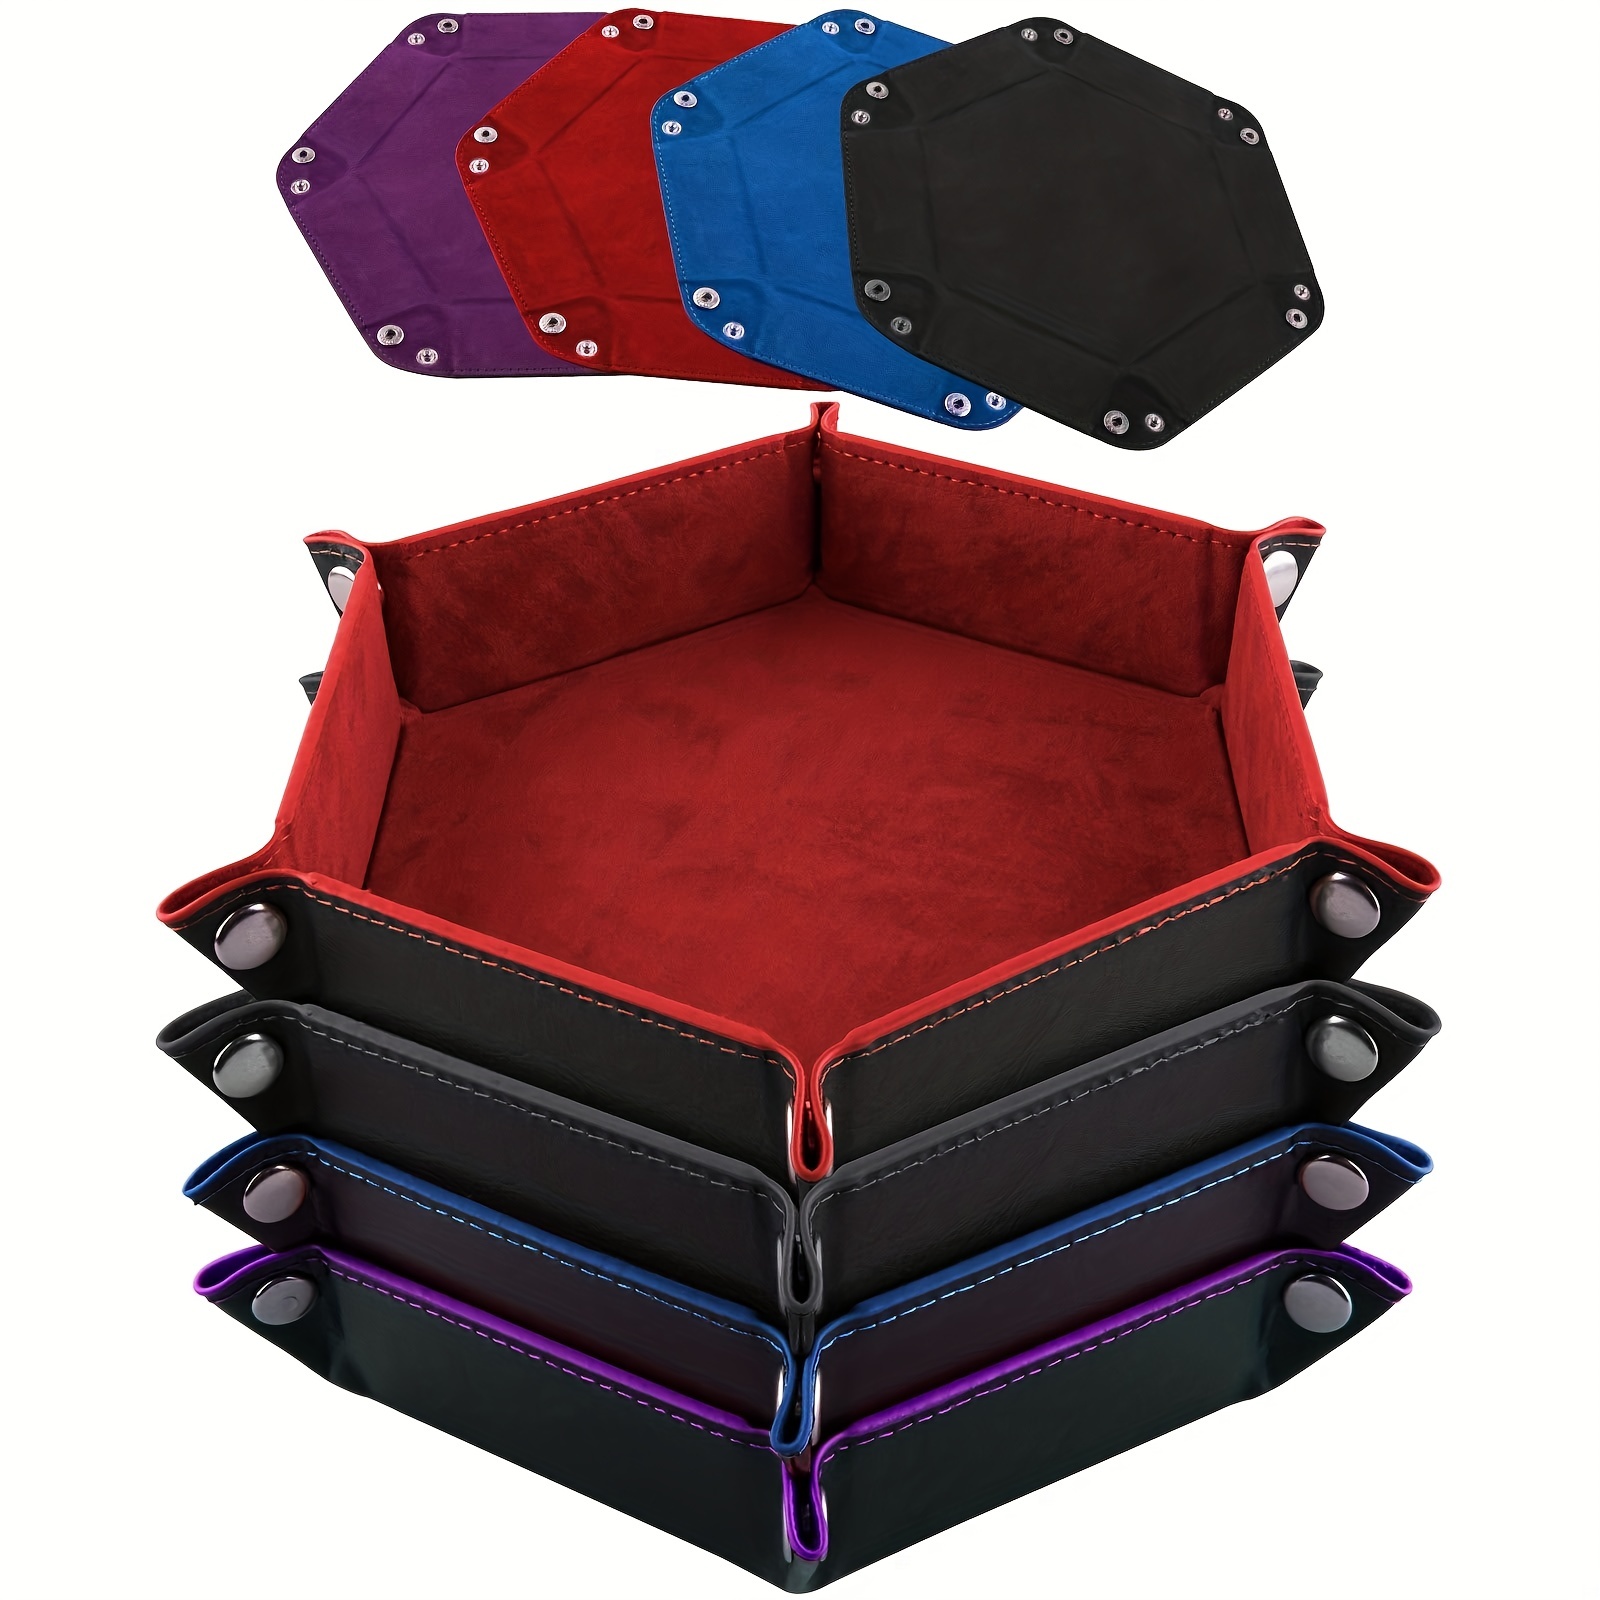 

4pcs Dice Tray Set Foldable Dice Tray Hexagon Dice Rolling Tray Pu Leather Dice Holder For Dice Games Like Rpg, Dnd And Other Desktop Games (red, Black, Blue And Purple)